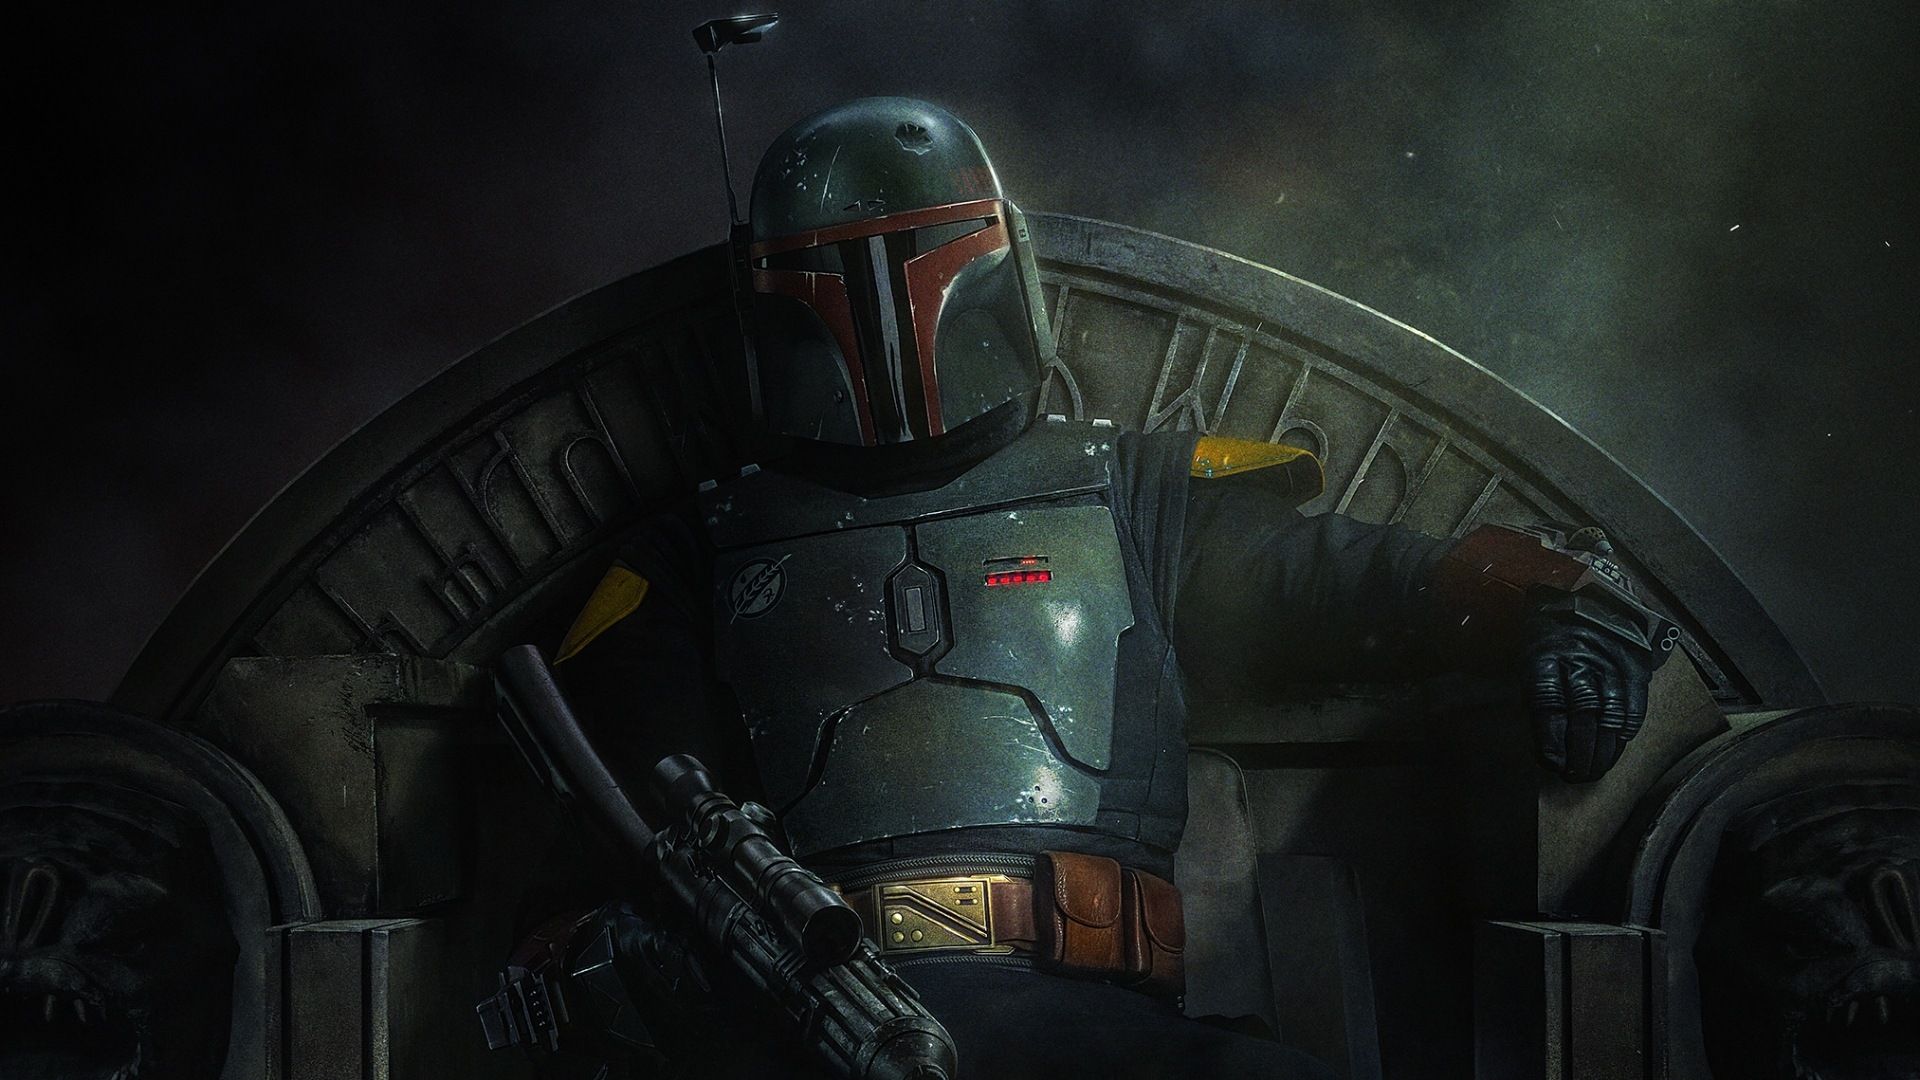 The Book of Boba Fett background